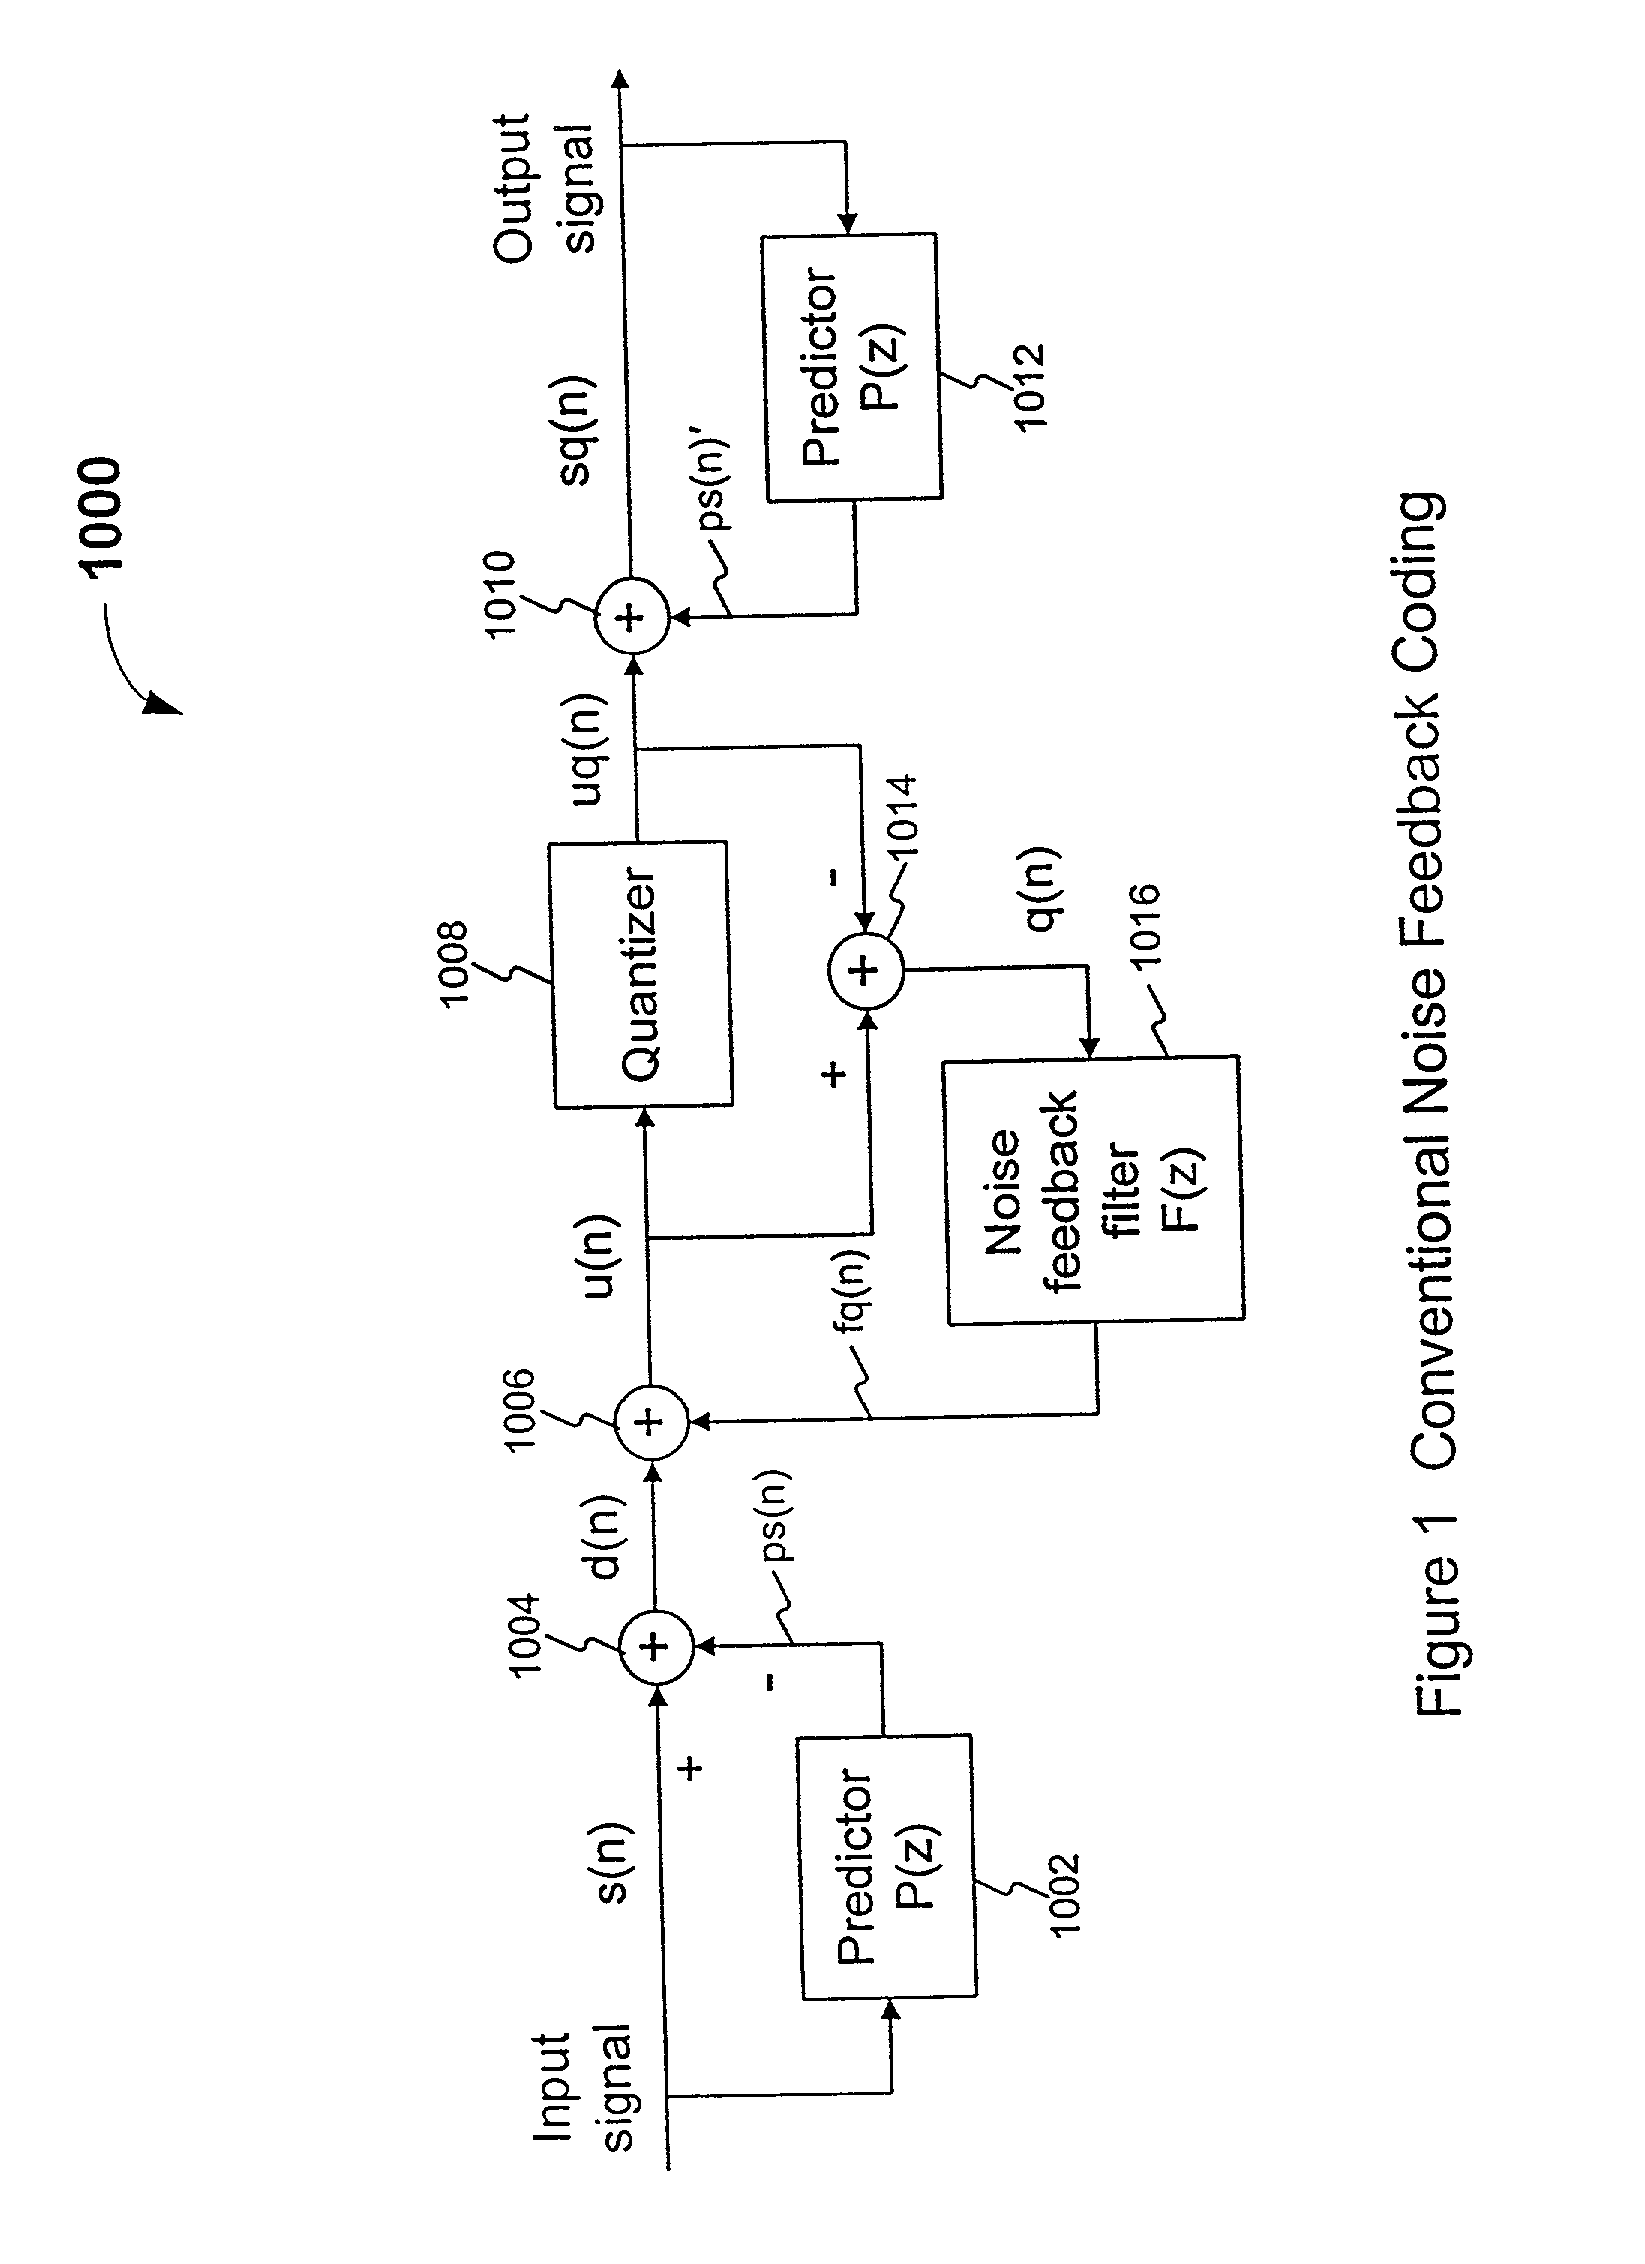 Noise feedback coding method and system for efficiently searching vector quantization codevectors used for coding a speech signal